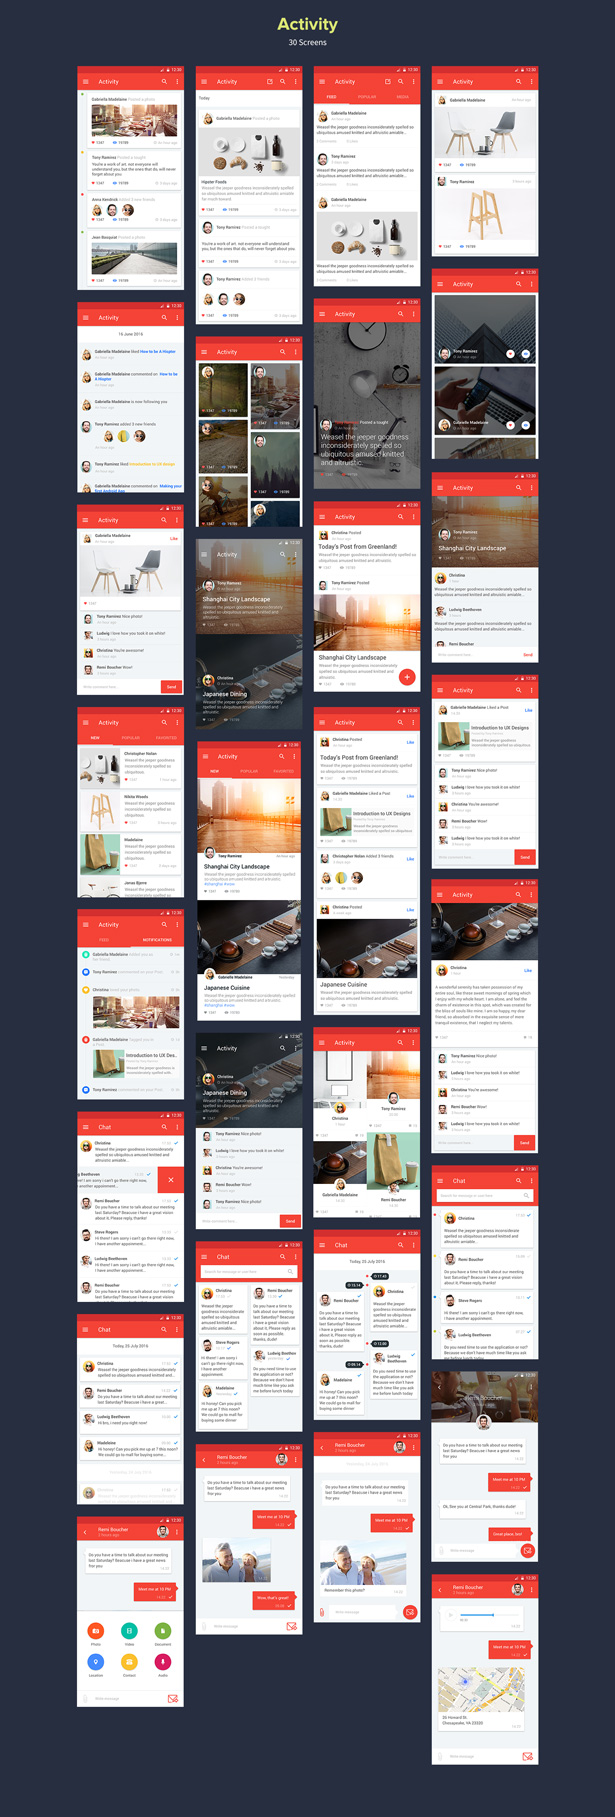 Material Design Comment Native - 1